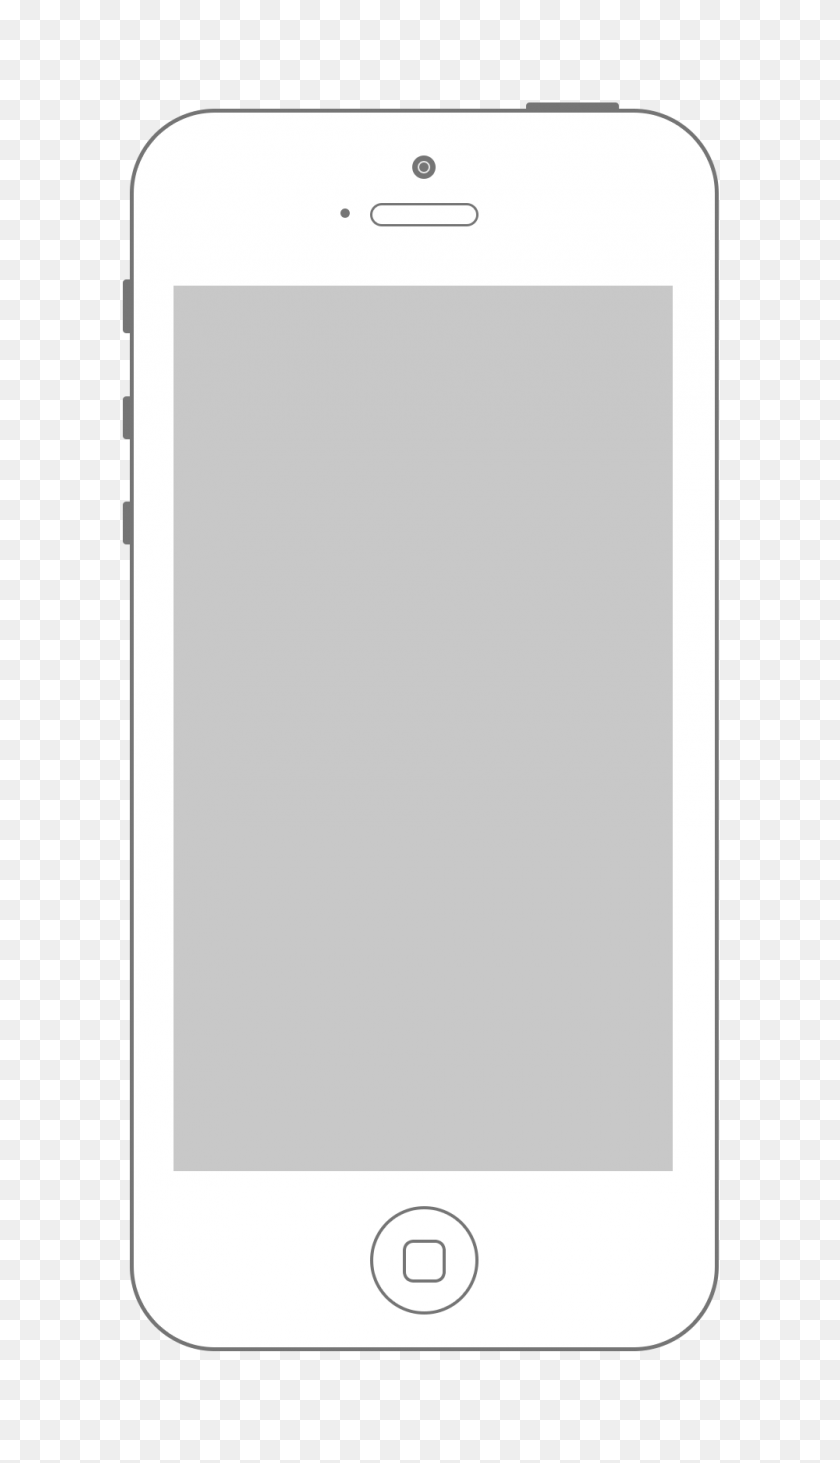 1000x1800 Apple Iphone Clipart Blank - Iphone PNG Image